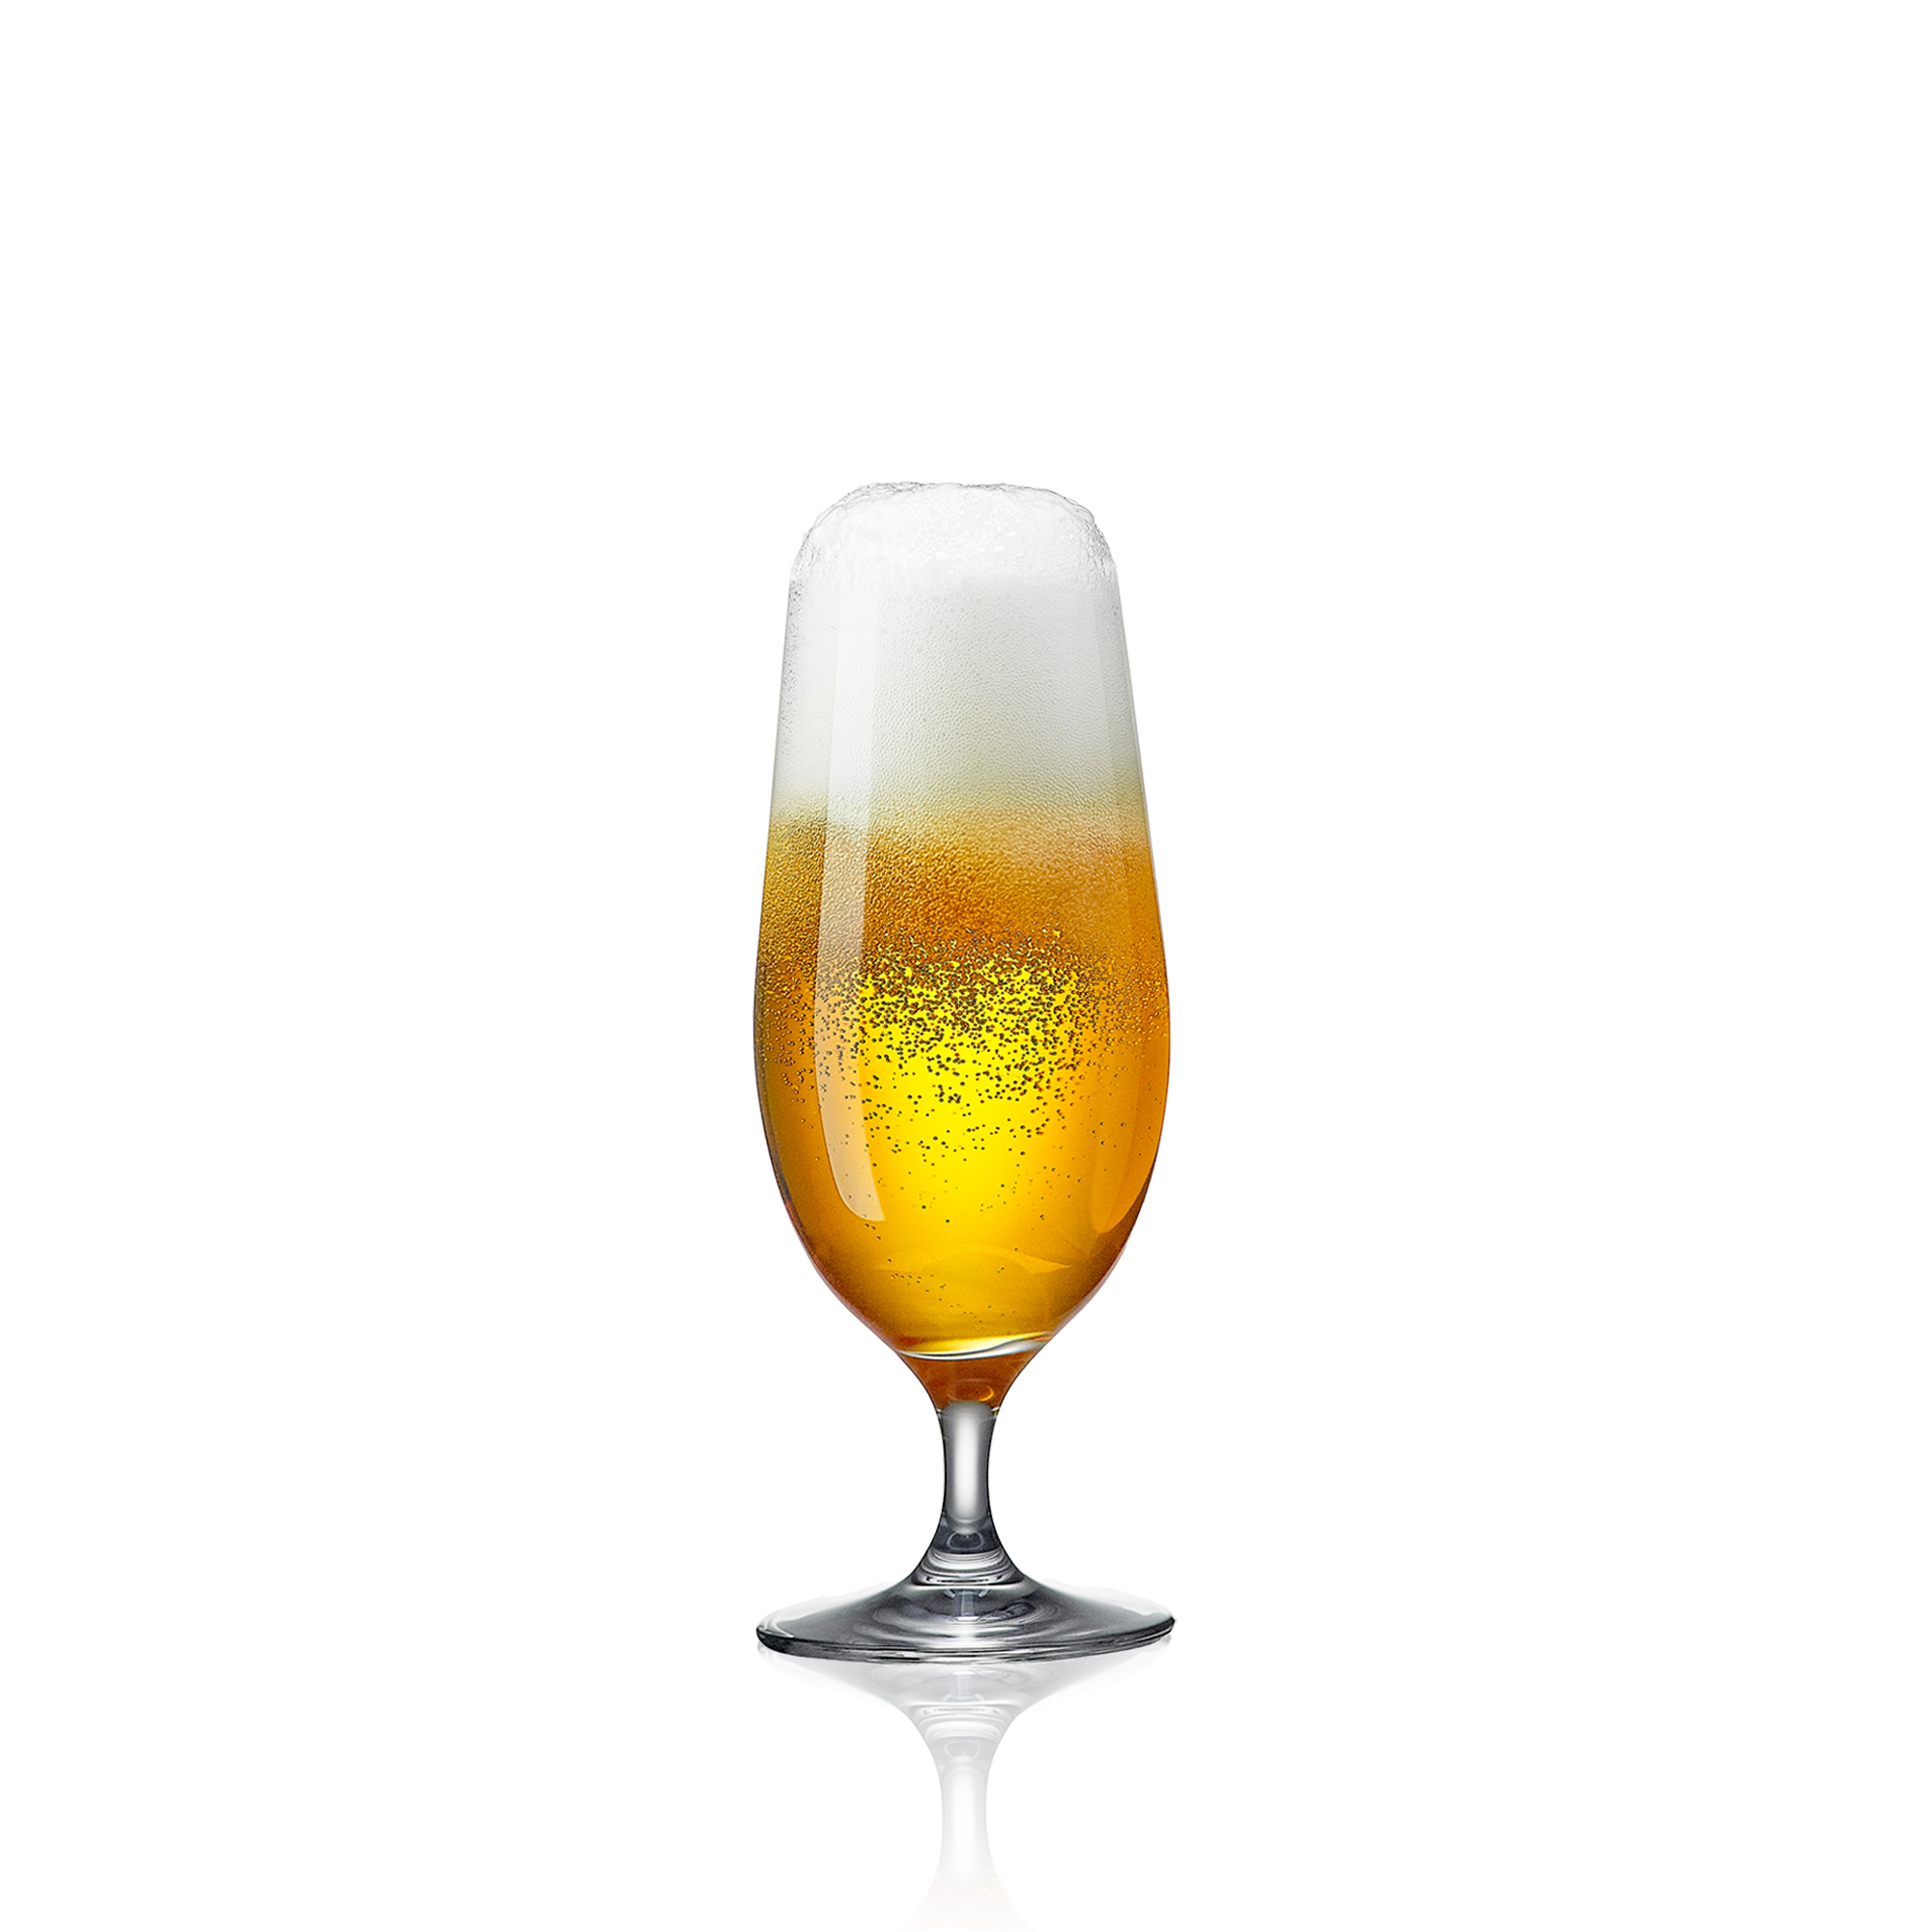 Made In Cookware - Stemmed Beer Glasses - 14 oz - Set of 4 - Italian Made  Crystal Glass - Titanium-Reinforced Stem Italy